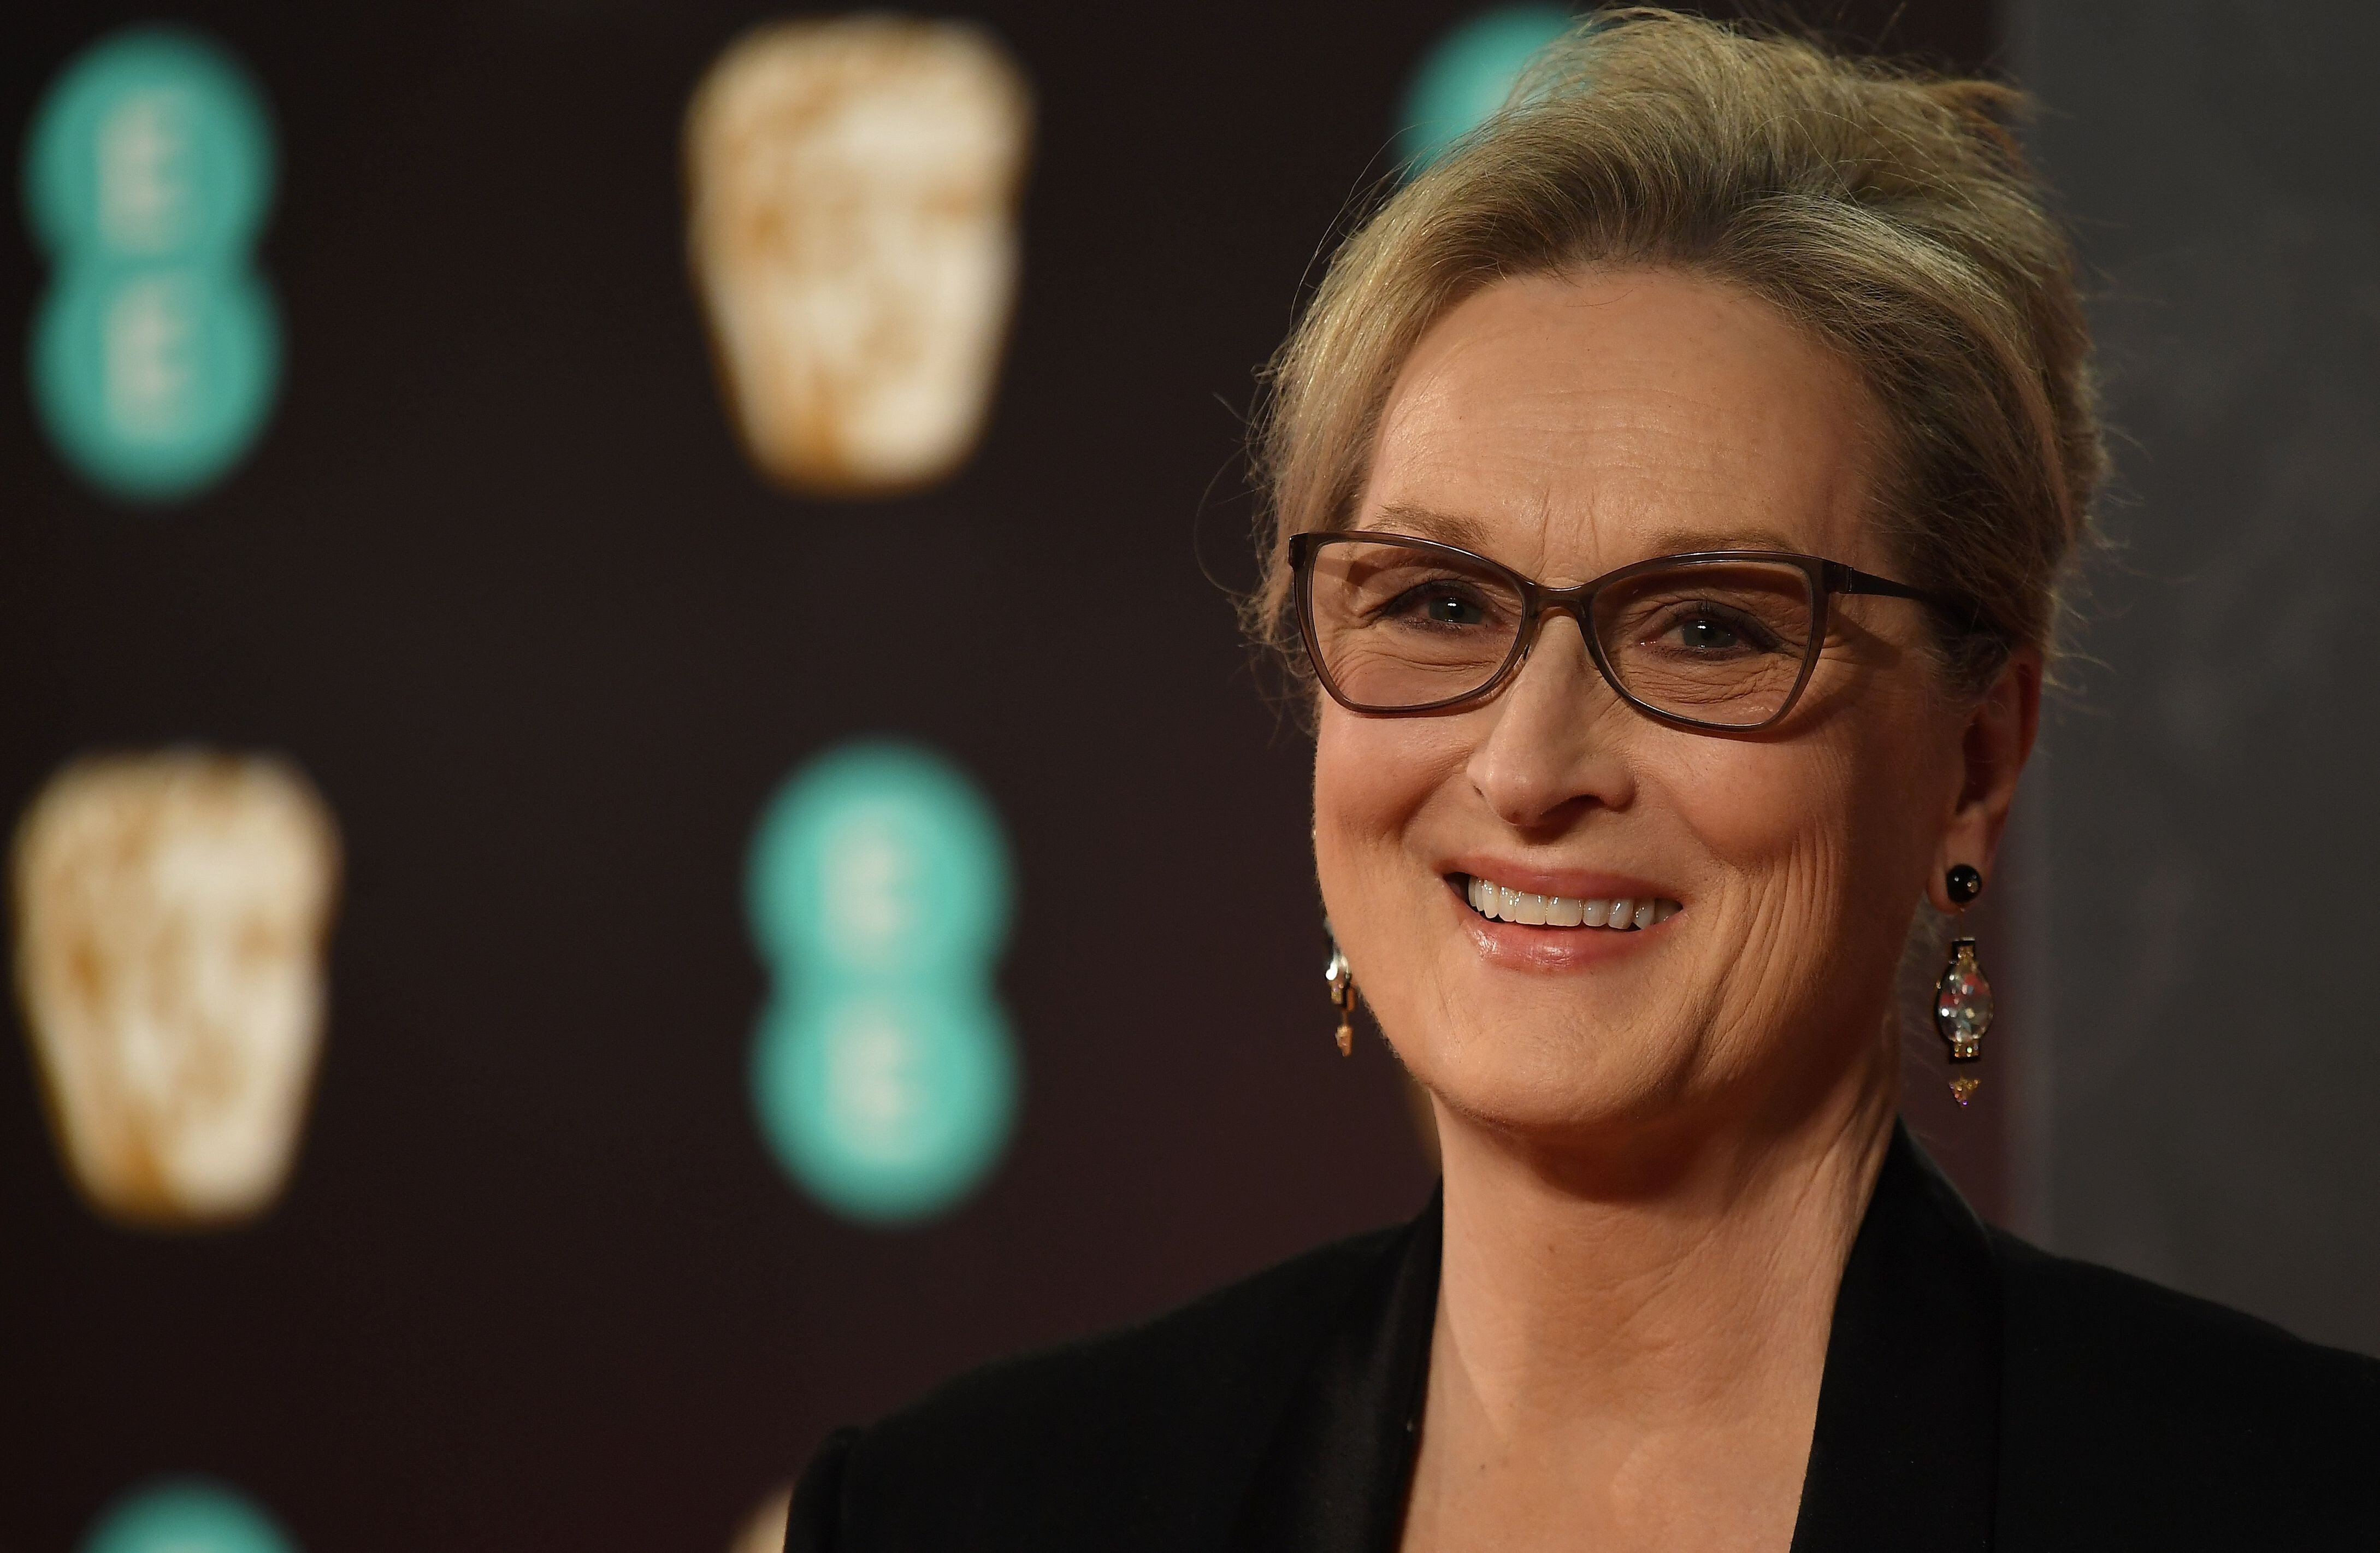 Meryl Streep is one of the most iconic actresses of our time. Photo: AFP